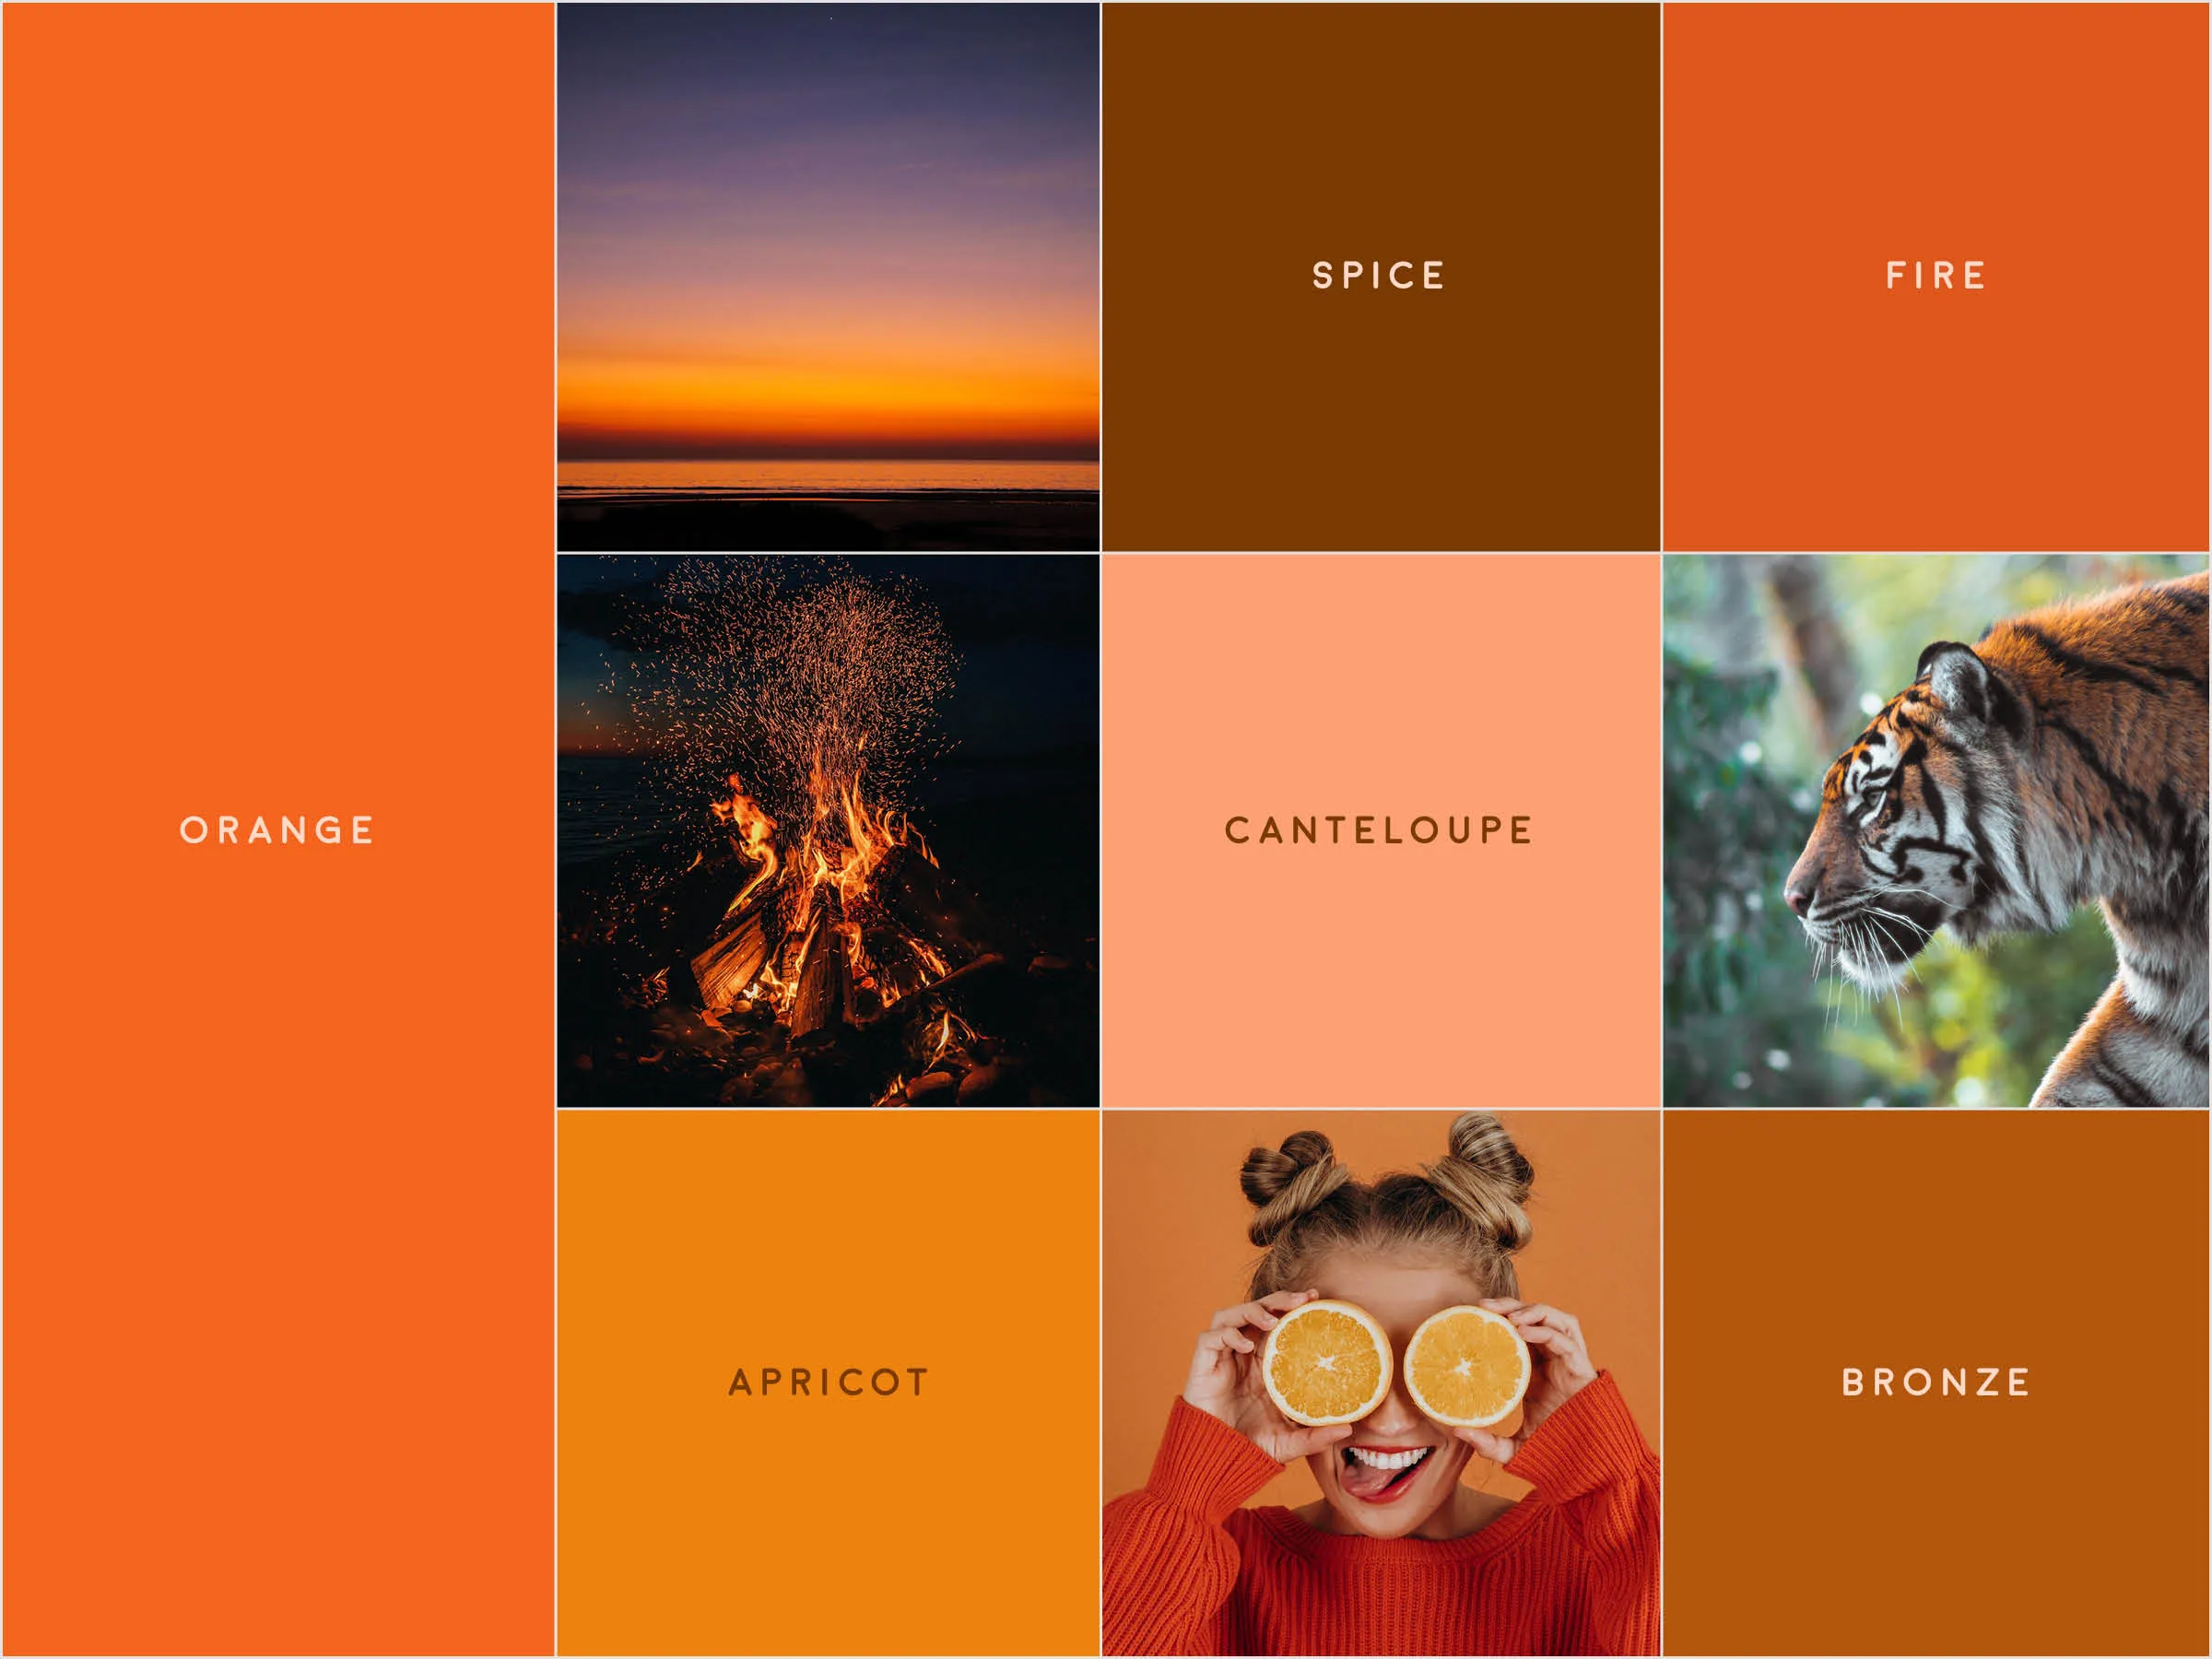 A gridded image with various tones of orange, with small photographs of a sunset, a bonfire, a tiger, and the orange fruit